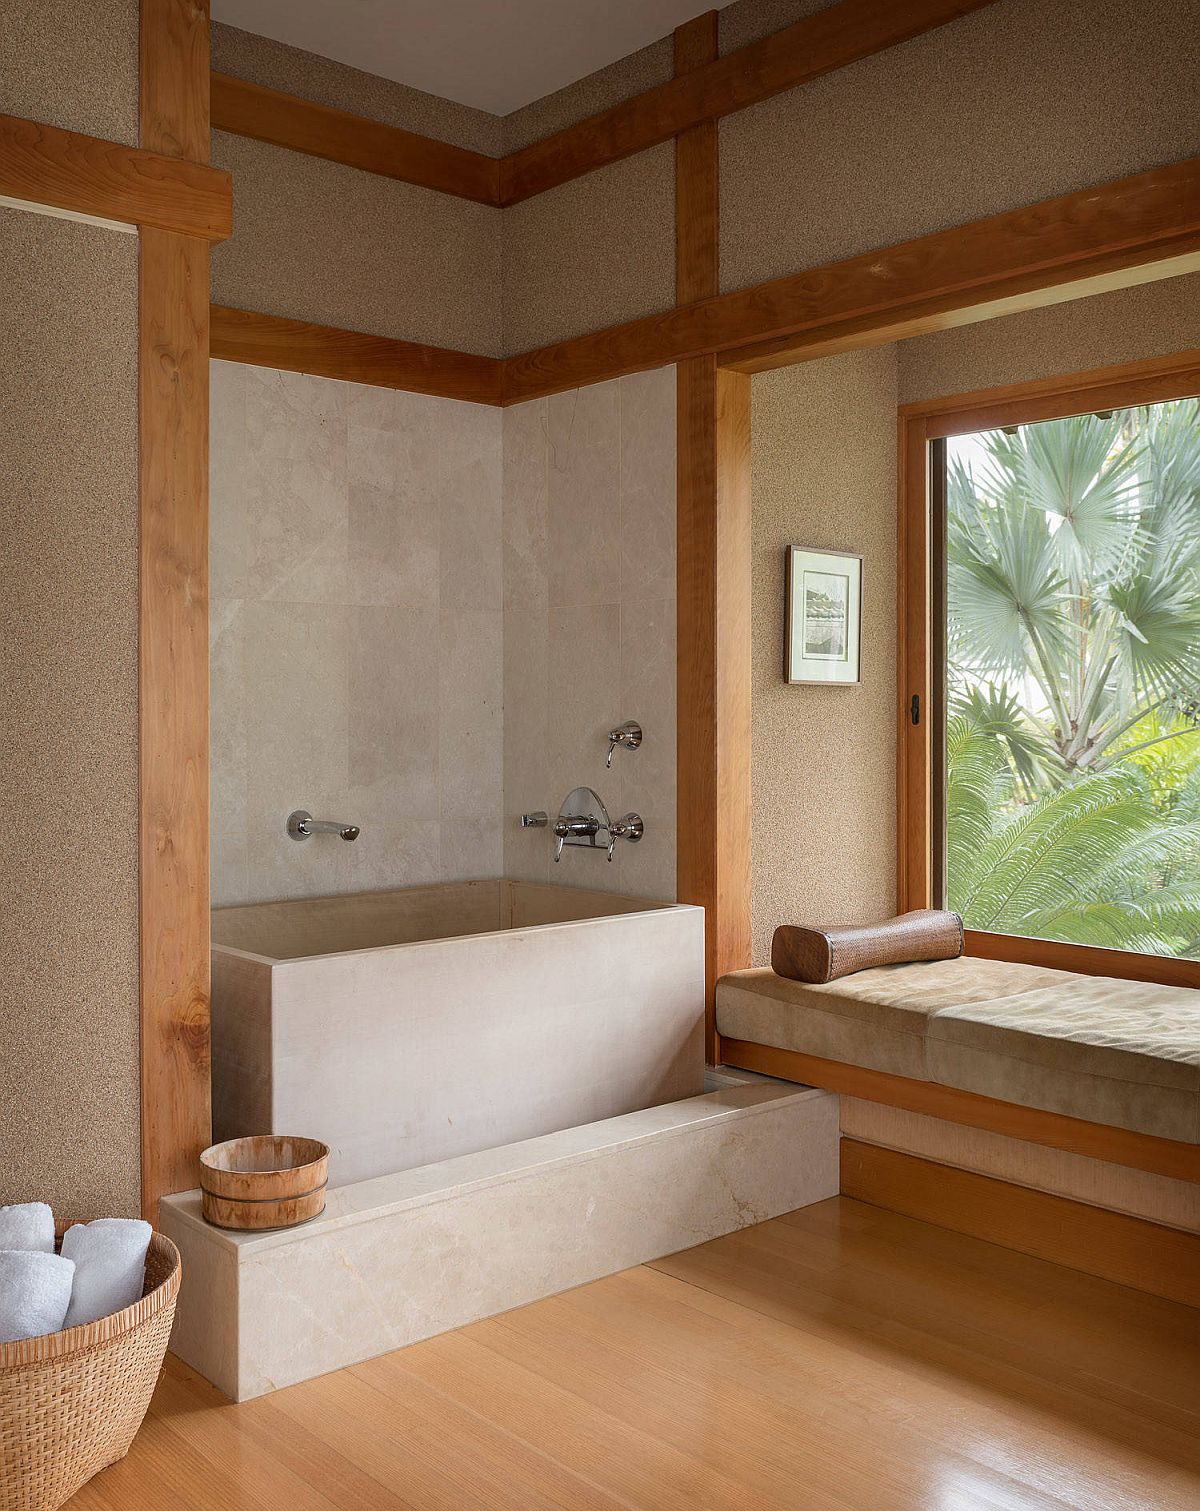 Modern-Asian-style-bathroom-with-a-smart-soaking-tub-in-the-corner-27059